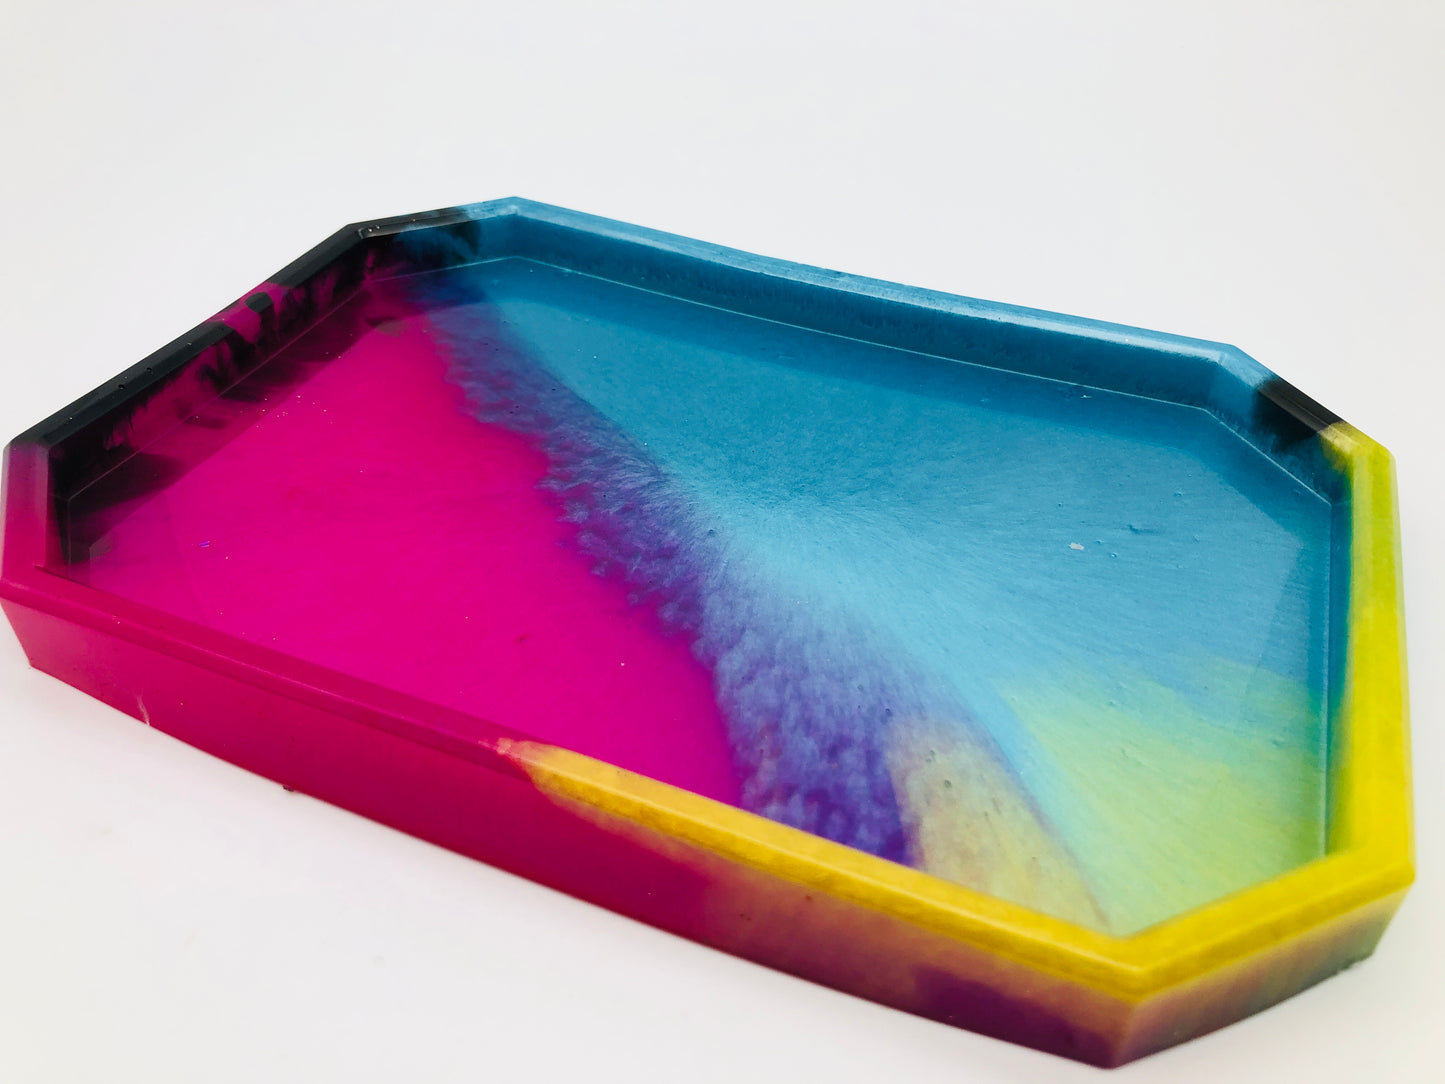 Ornate Trays & Dishes - Stunning Resin Pieces